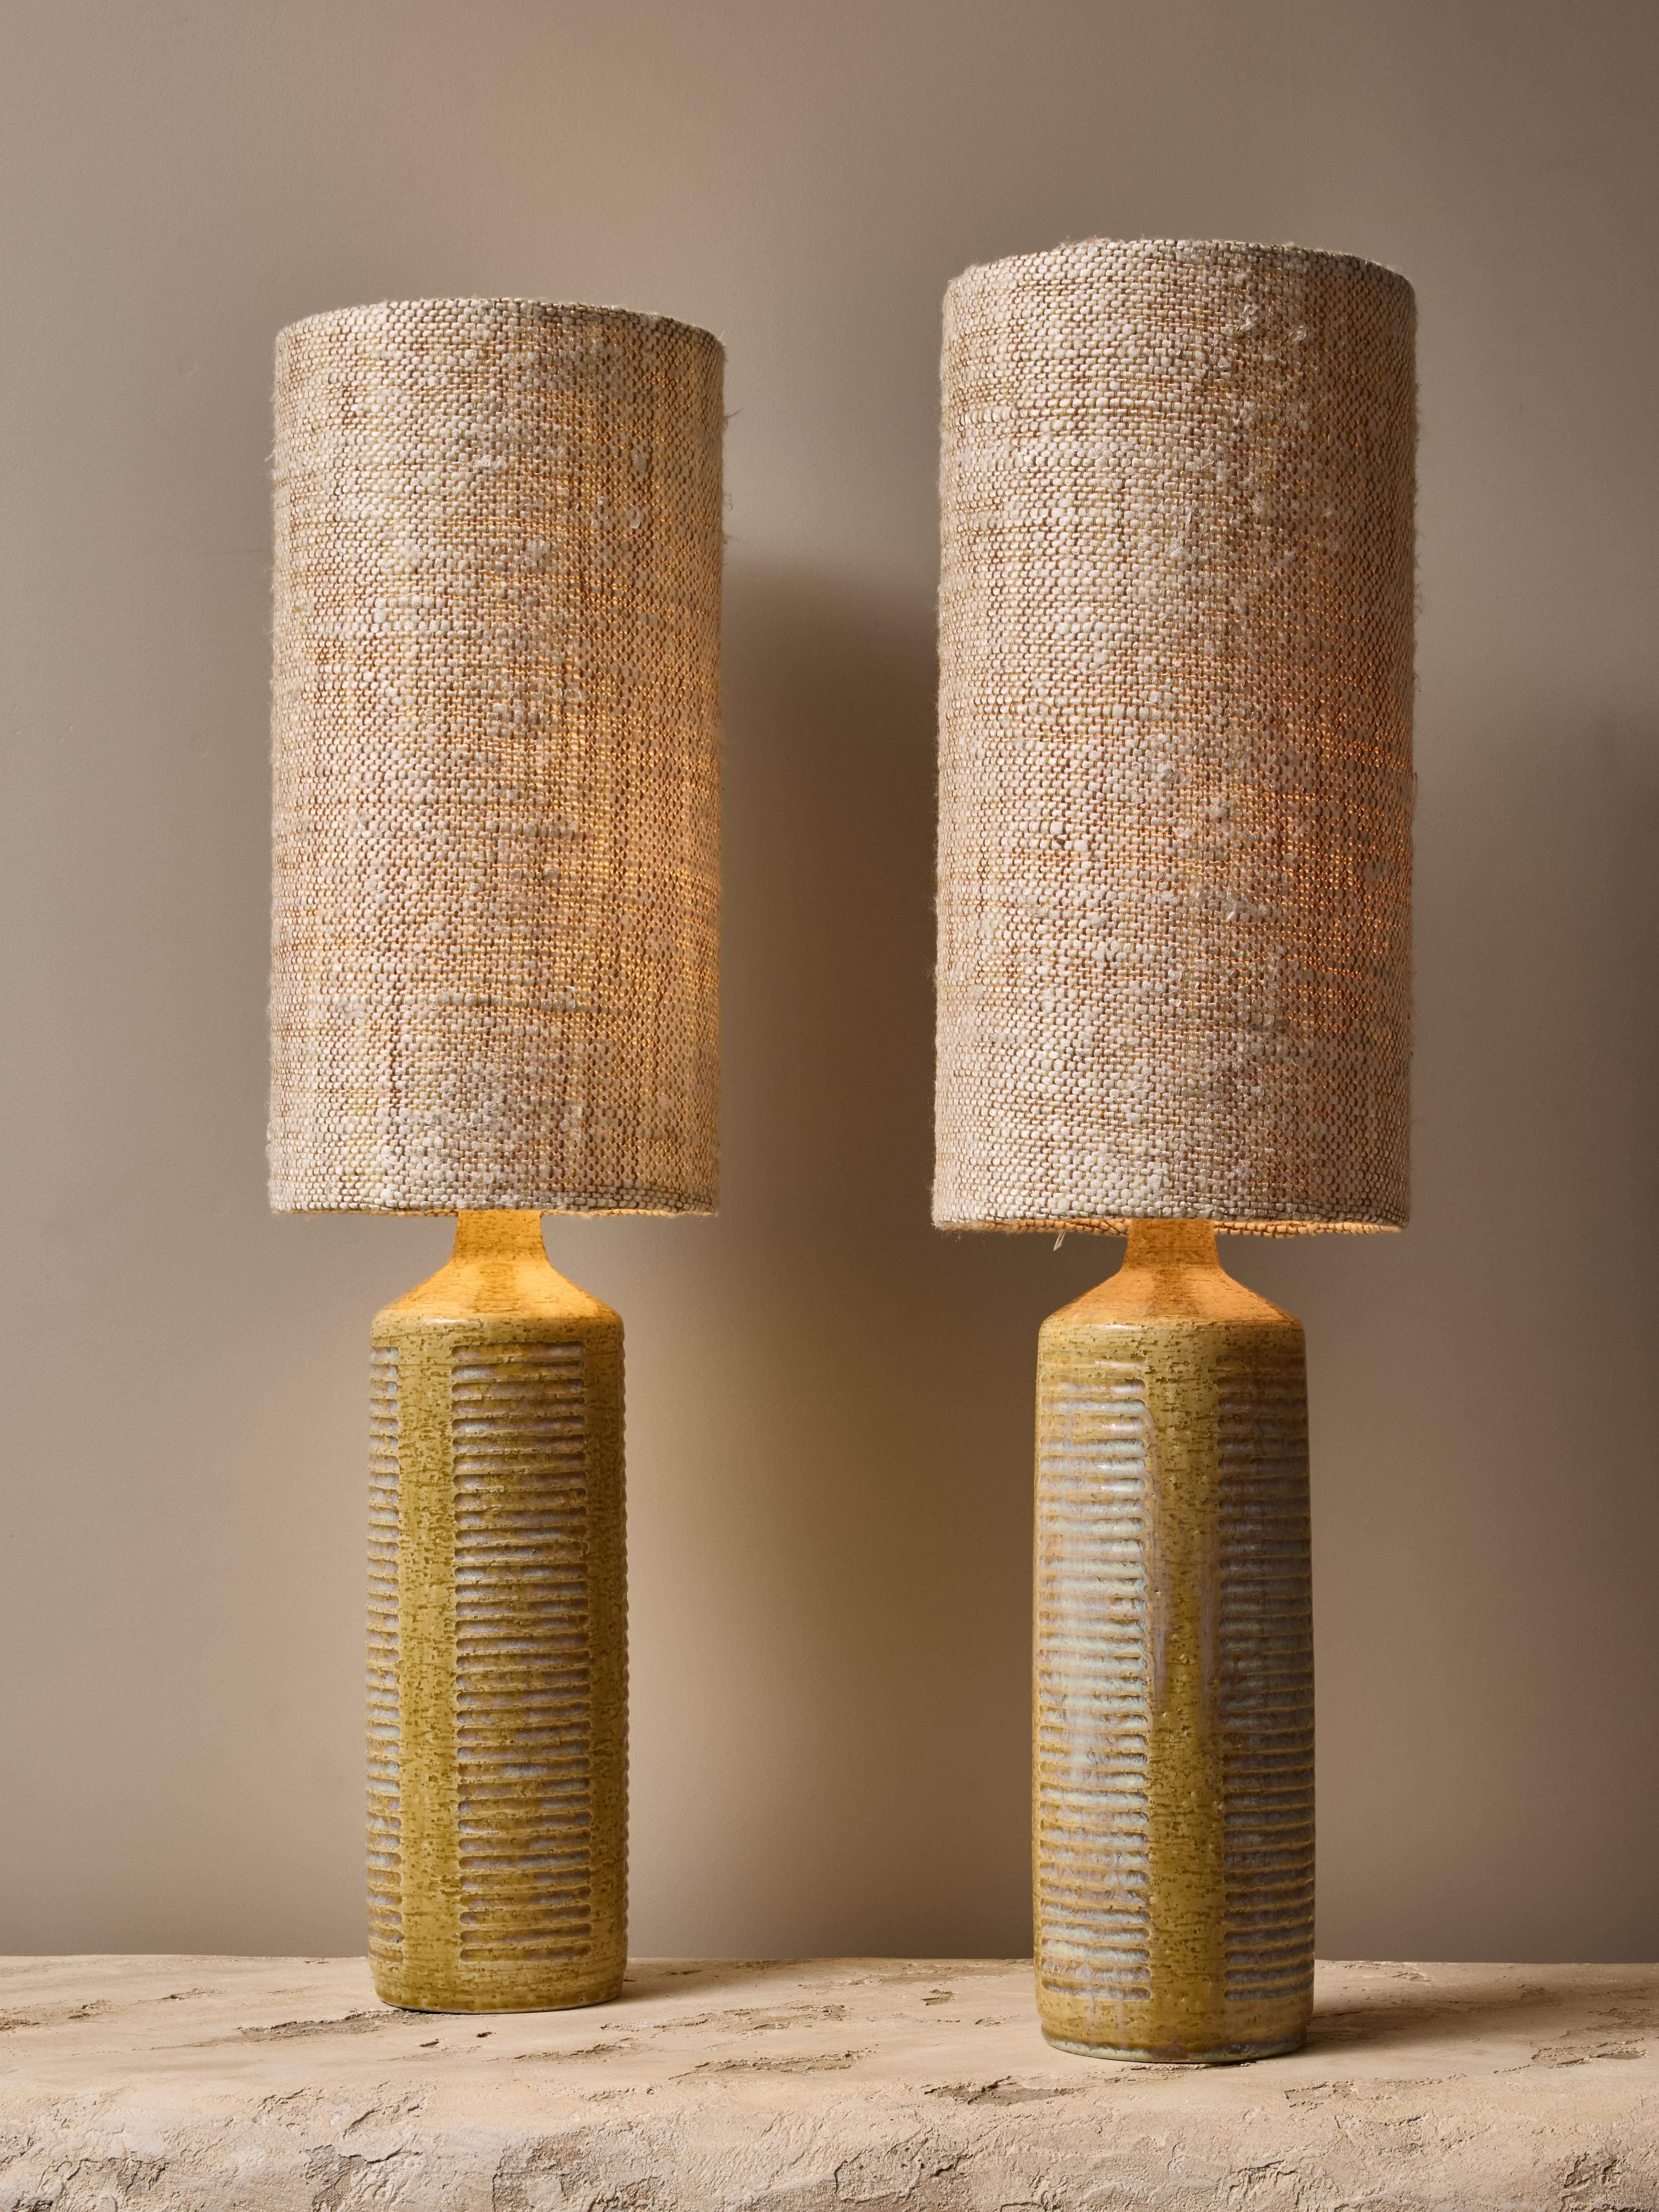 Pair of table lamps model DL27 in ceramic by the Danish designer Per Linneman-Schmidt for the manufacture Palshus. The lamps are covered in textured green glaze with teal touches in some of the horizontal grooves.

Topped with a contemporary tall